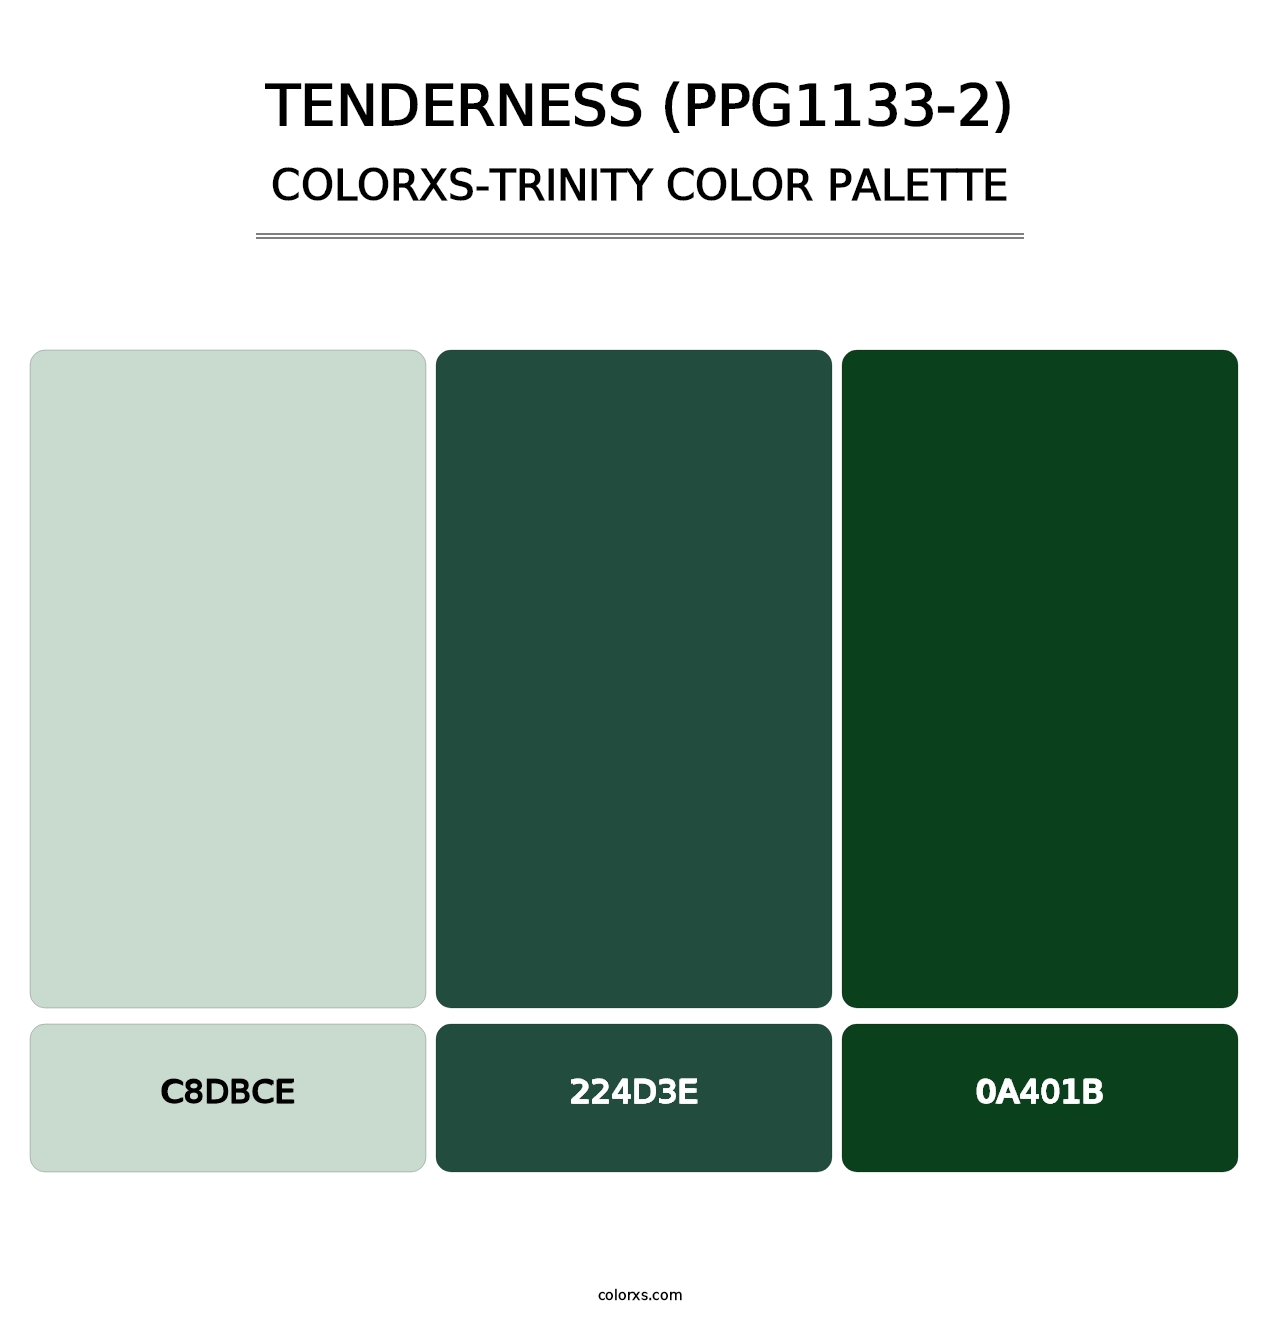 Tenderness (PPG1133-2) - Colorxs Trinity Palette